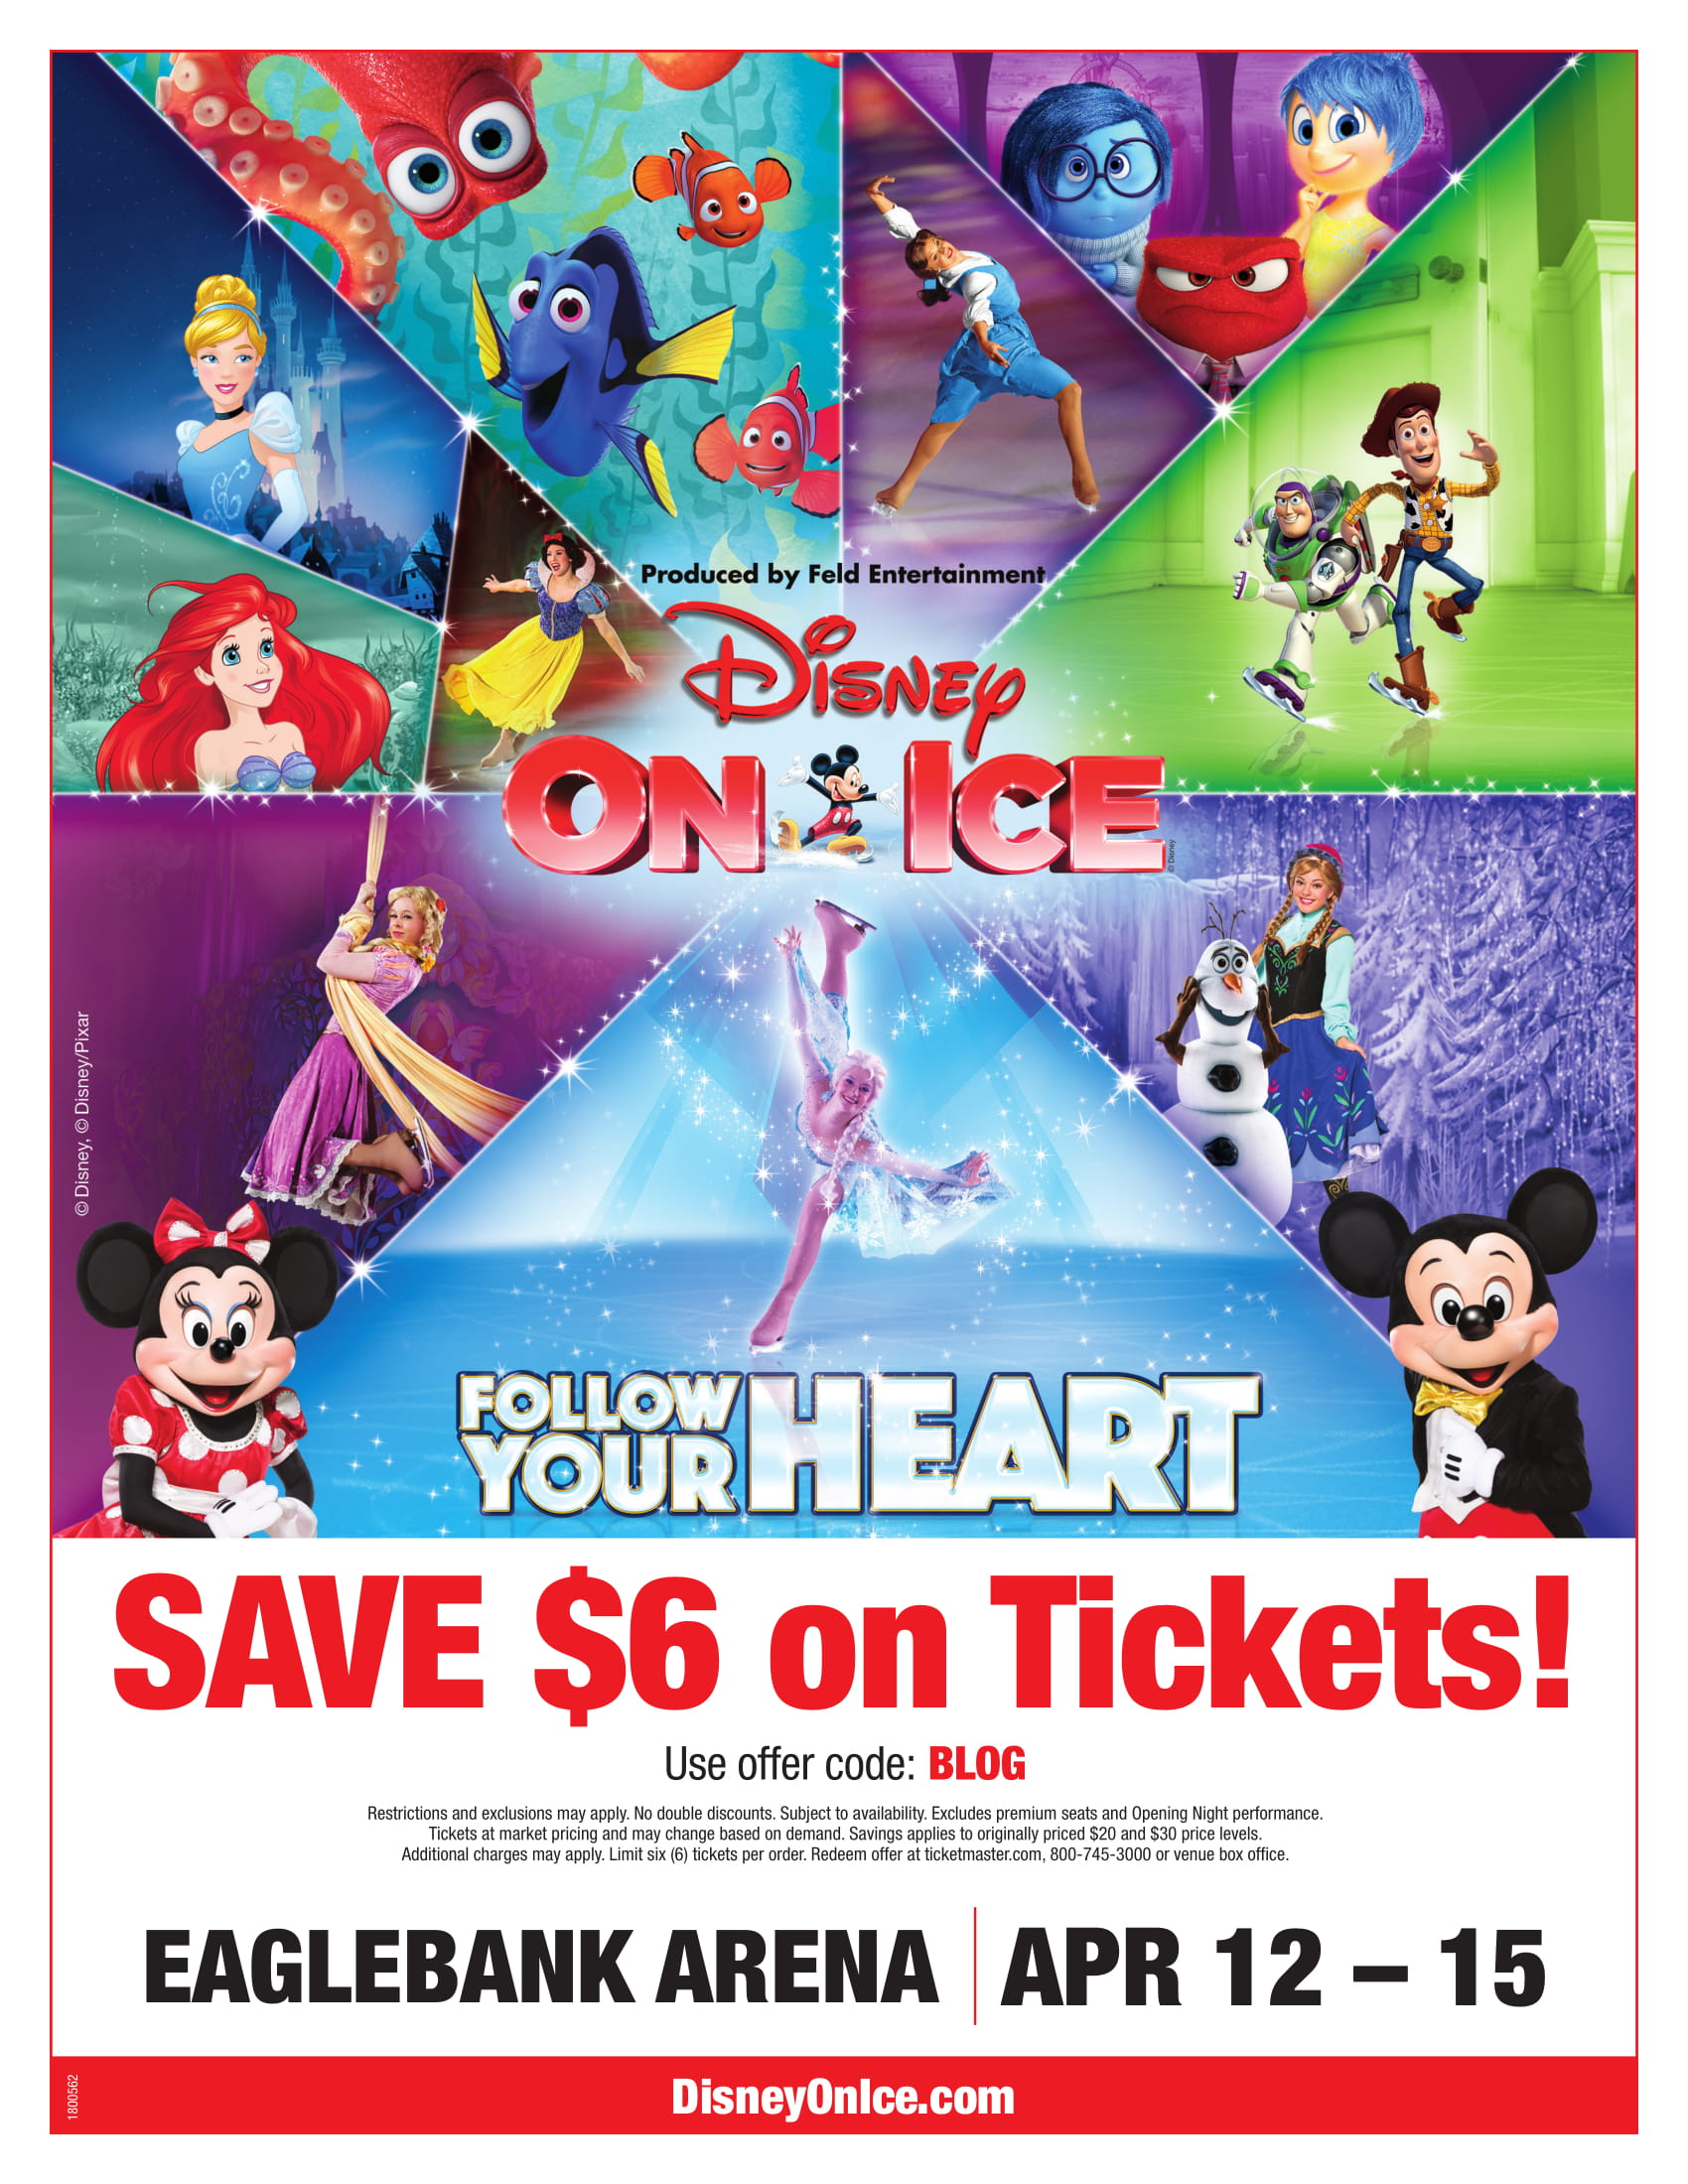 Disney On Ice presents Follow Your Heart is Coming to Eaglebank Arena